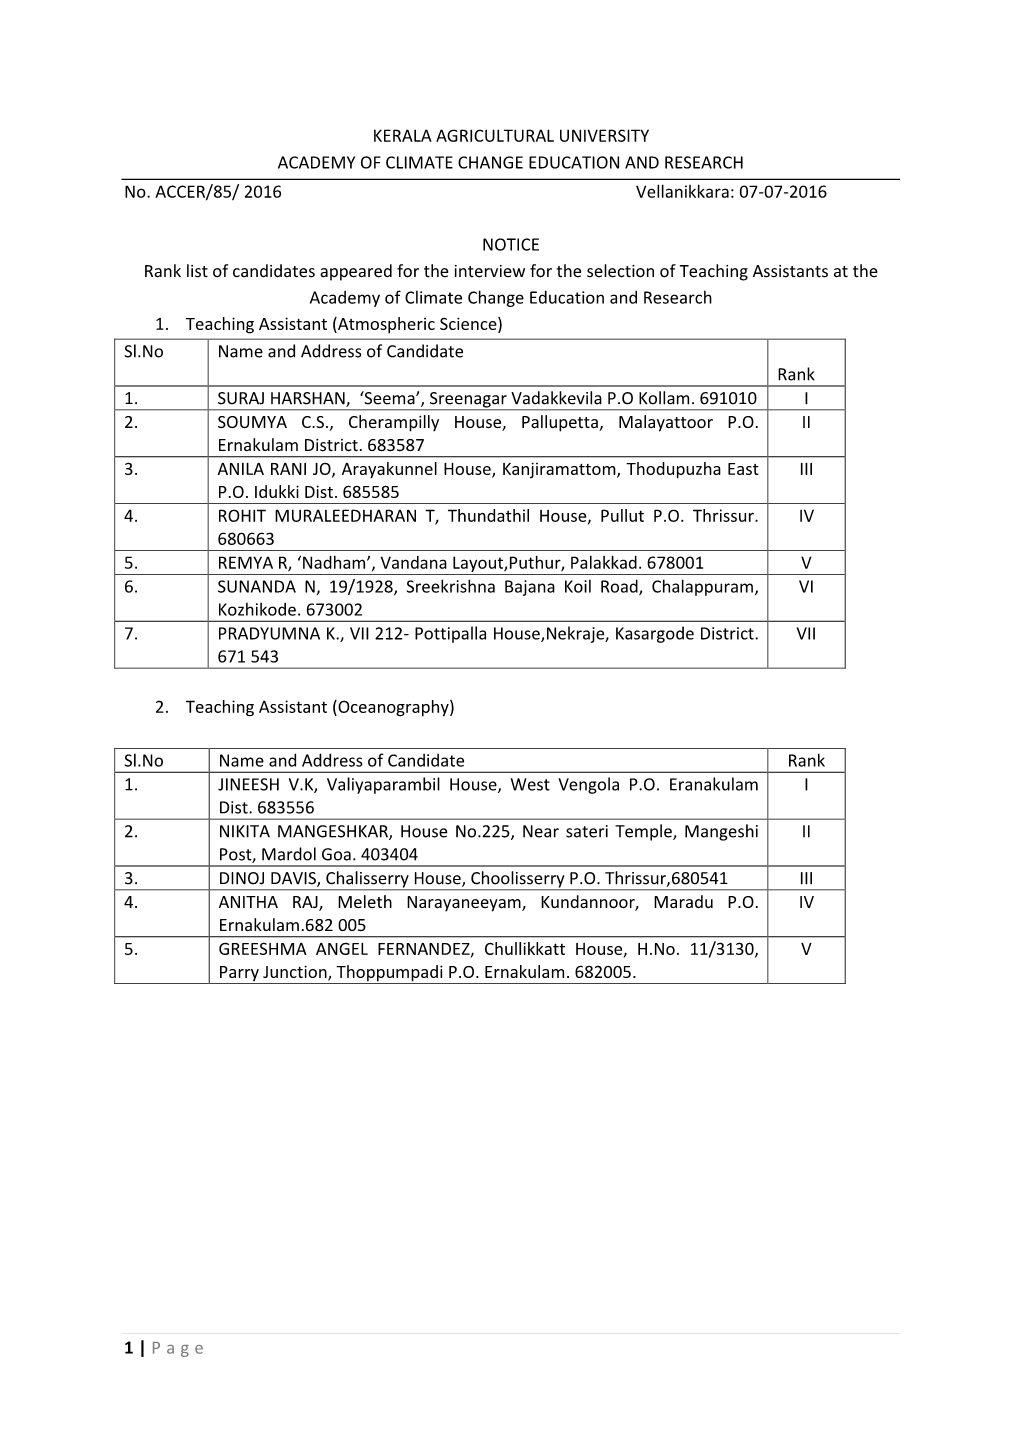 Rank List of Candidates Appeared for the Interview for the Selection of Teaching Assistants at the Academy of Climate Change Education and Research 1